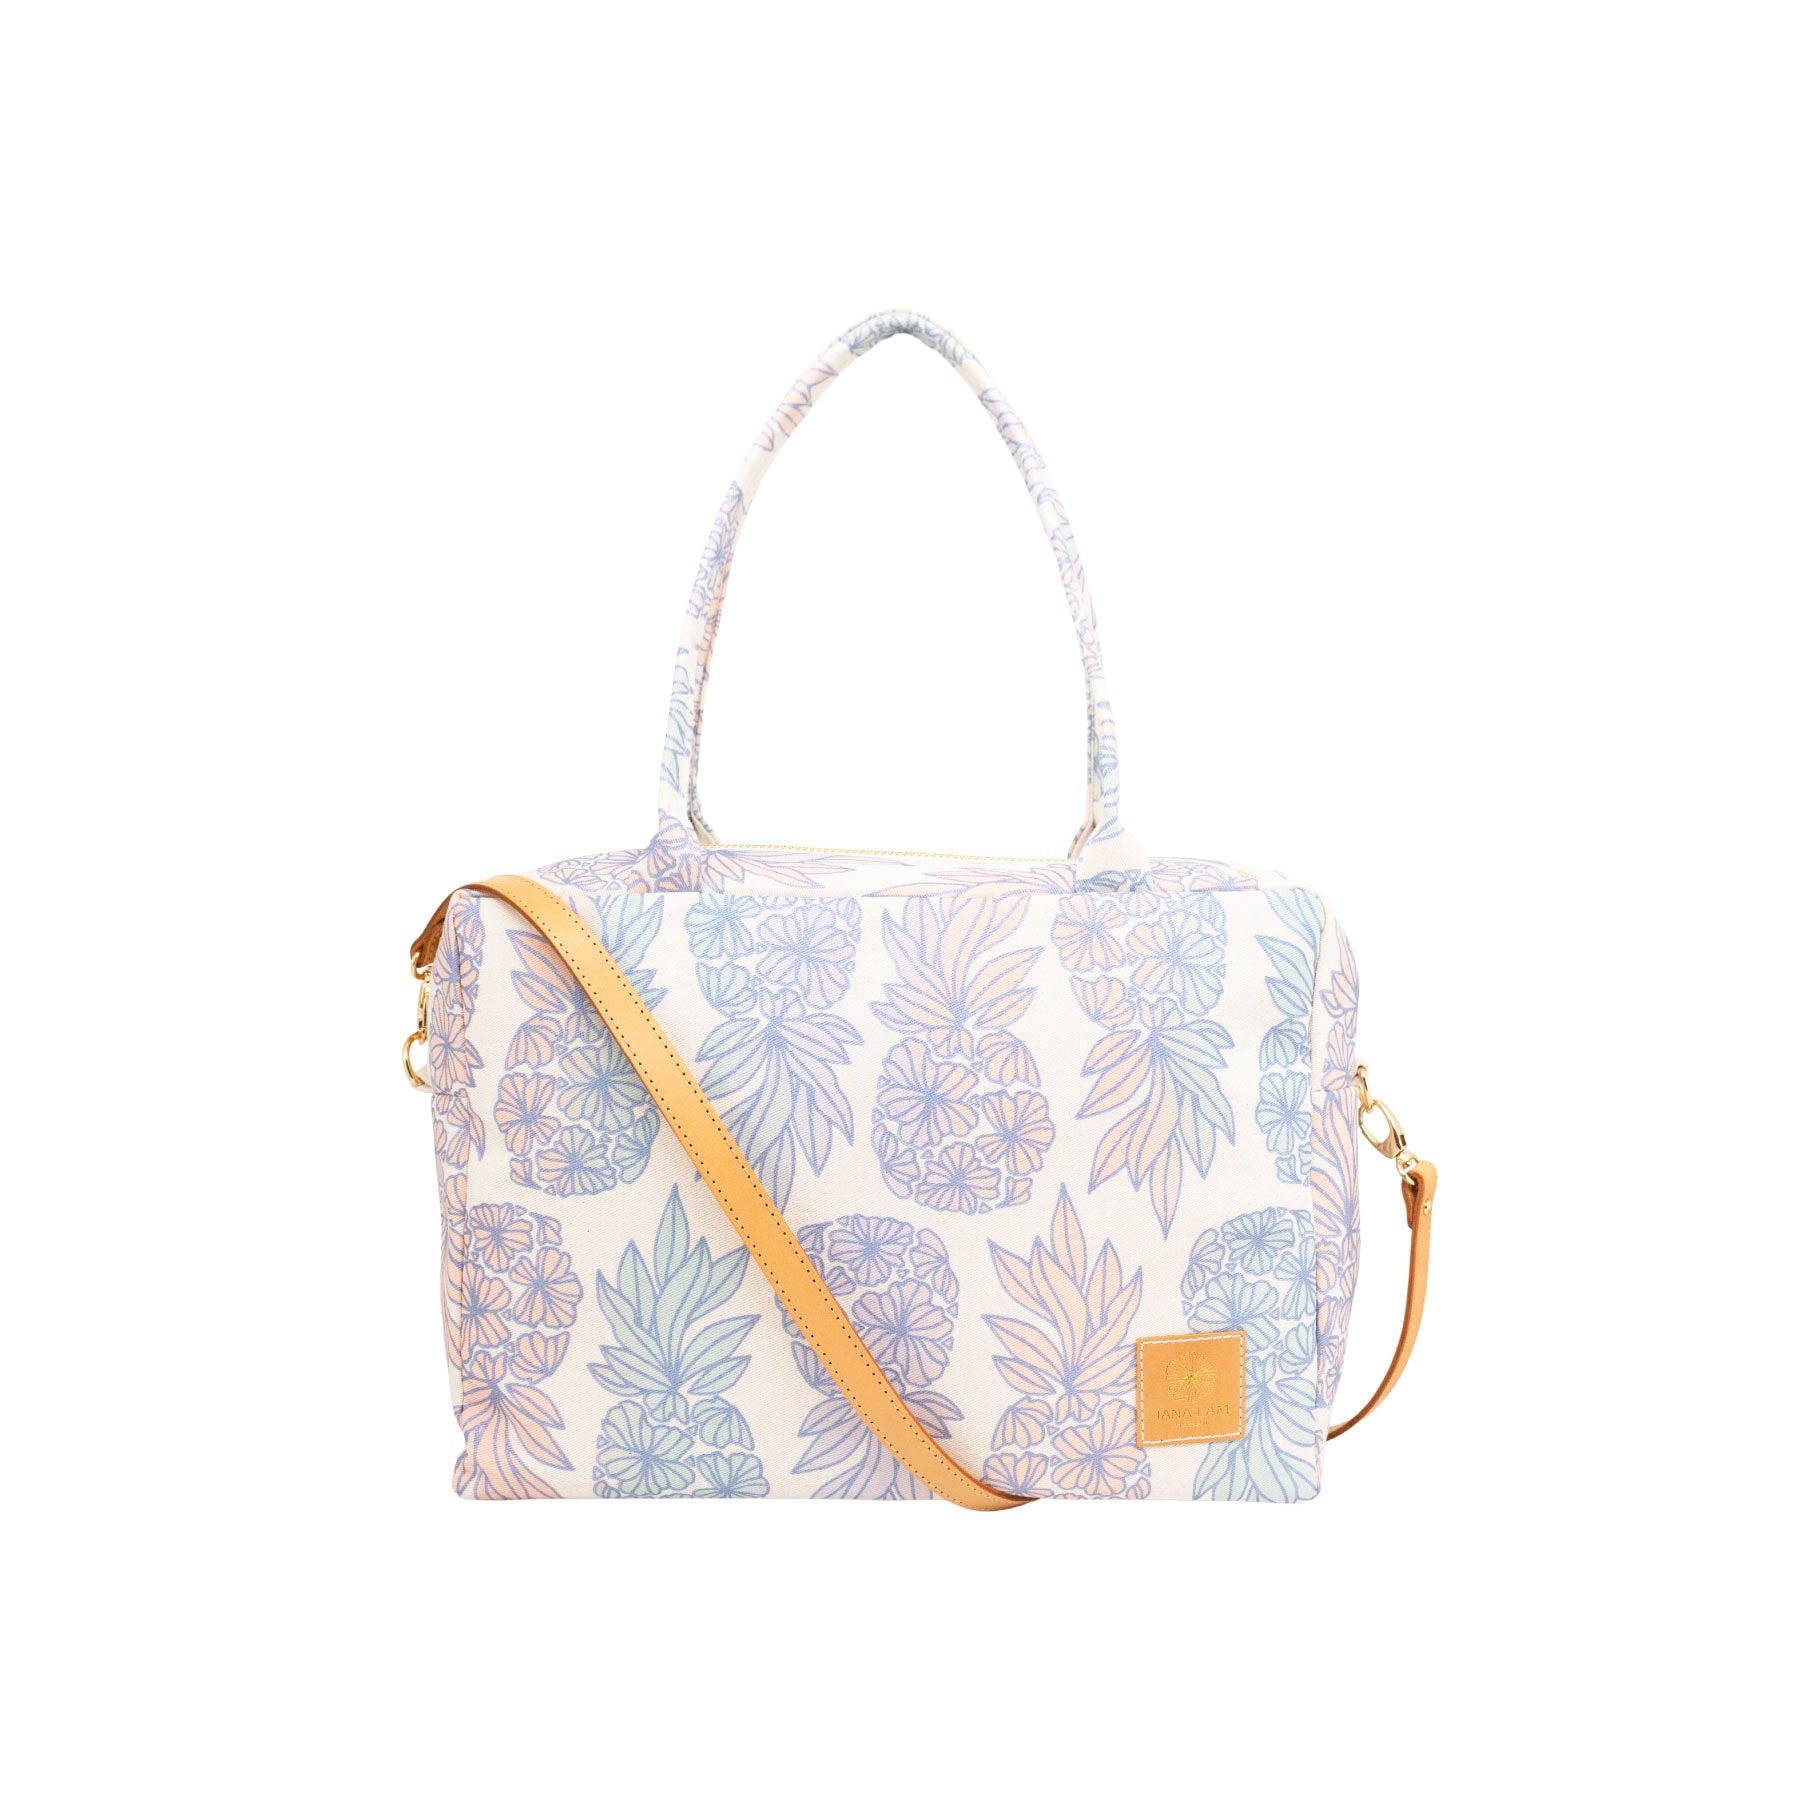 Mini Duffel • Seaflower Pineapple • Metallic Blue over Peach, Sage, and Lilac Mist Ombre